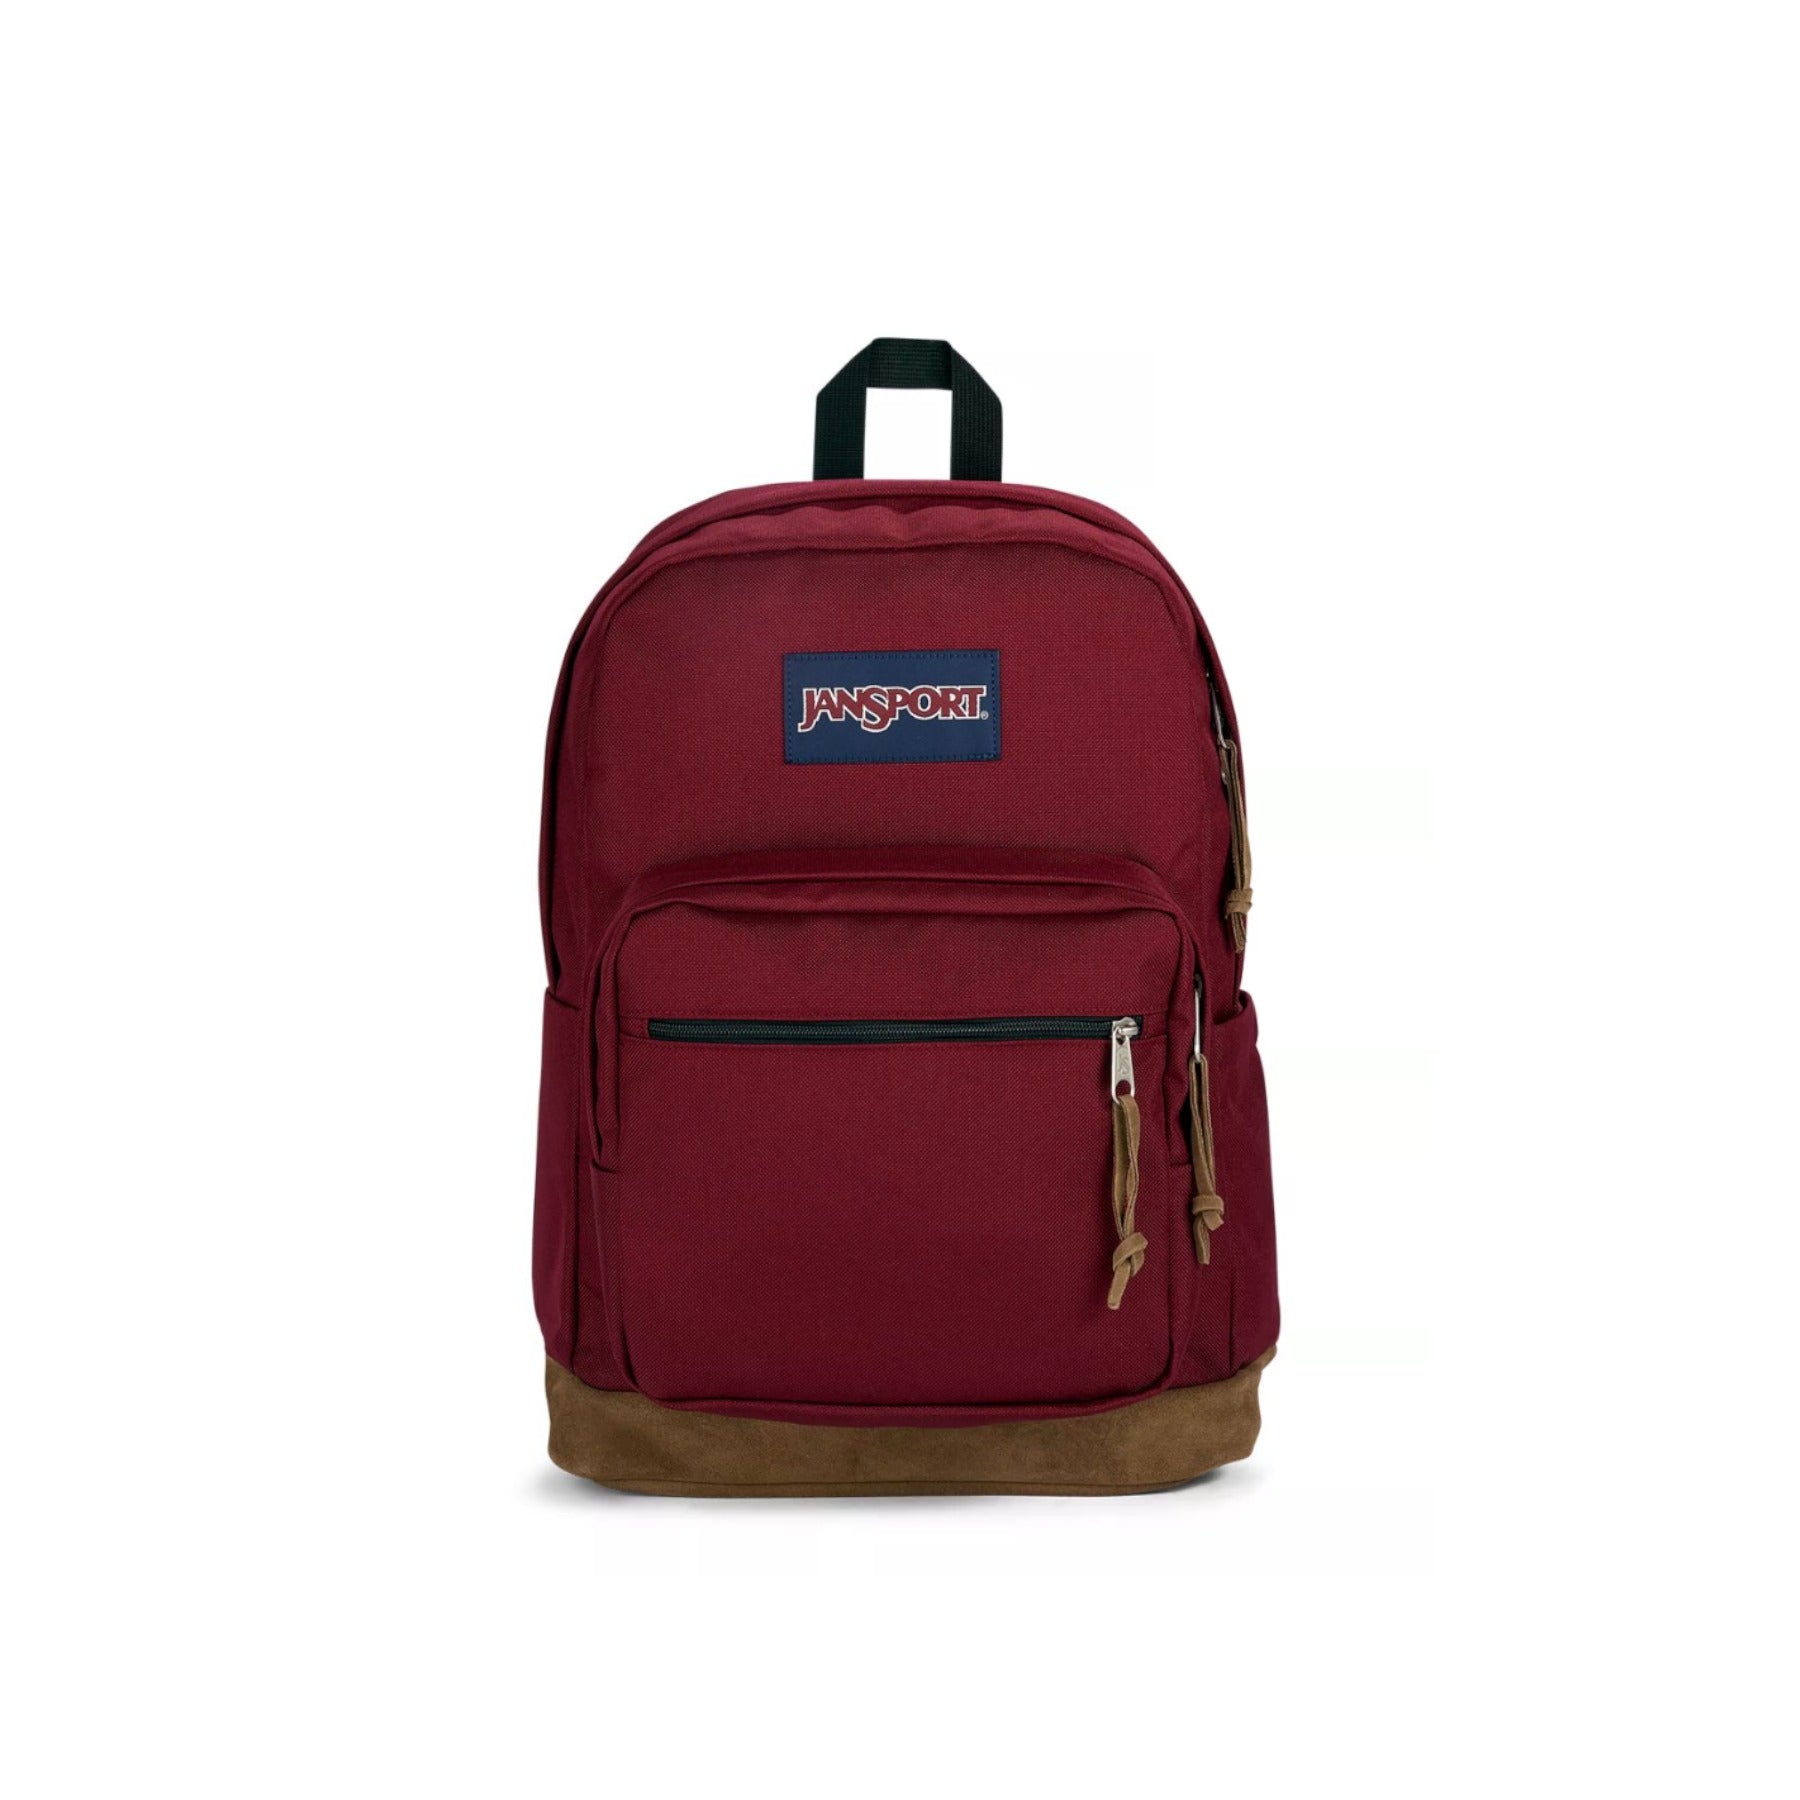 Jansport Right Pack Backpack - Russet Red